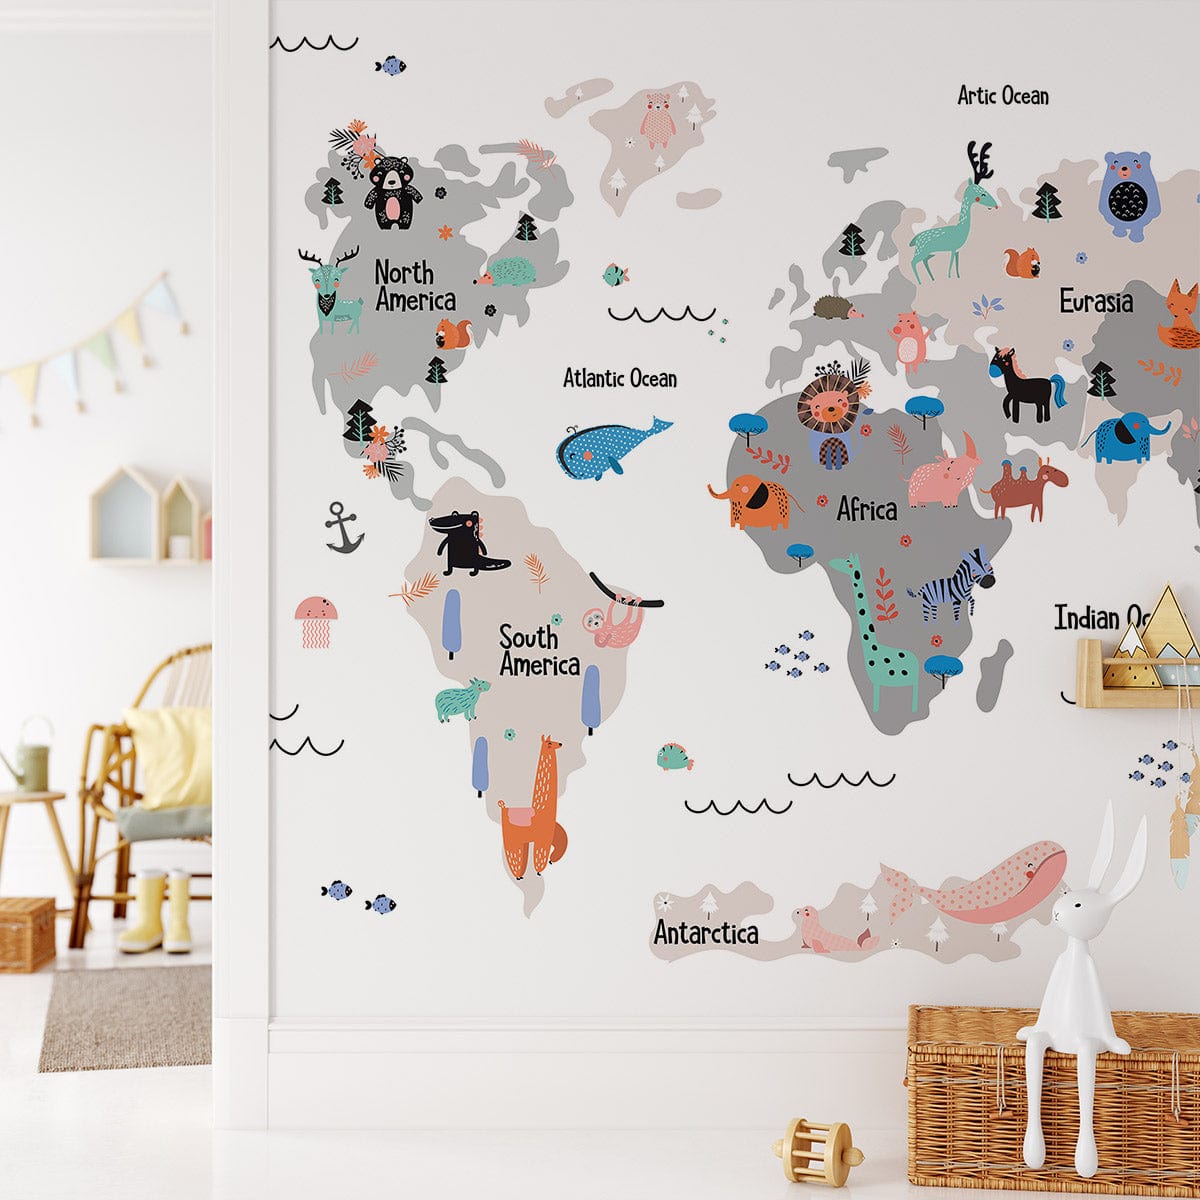 Animal map wall art that is both amusing and eye-catching